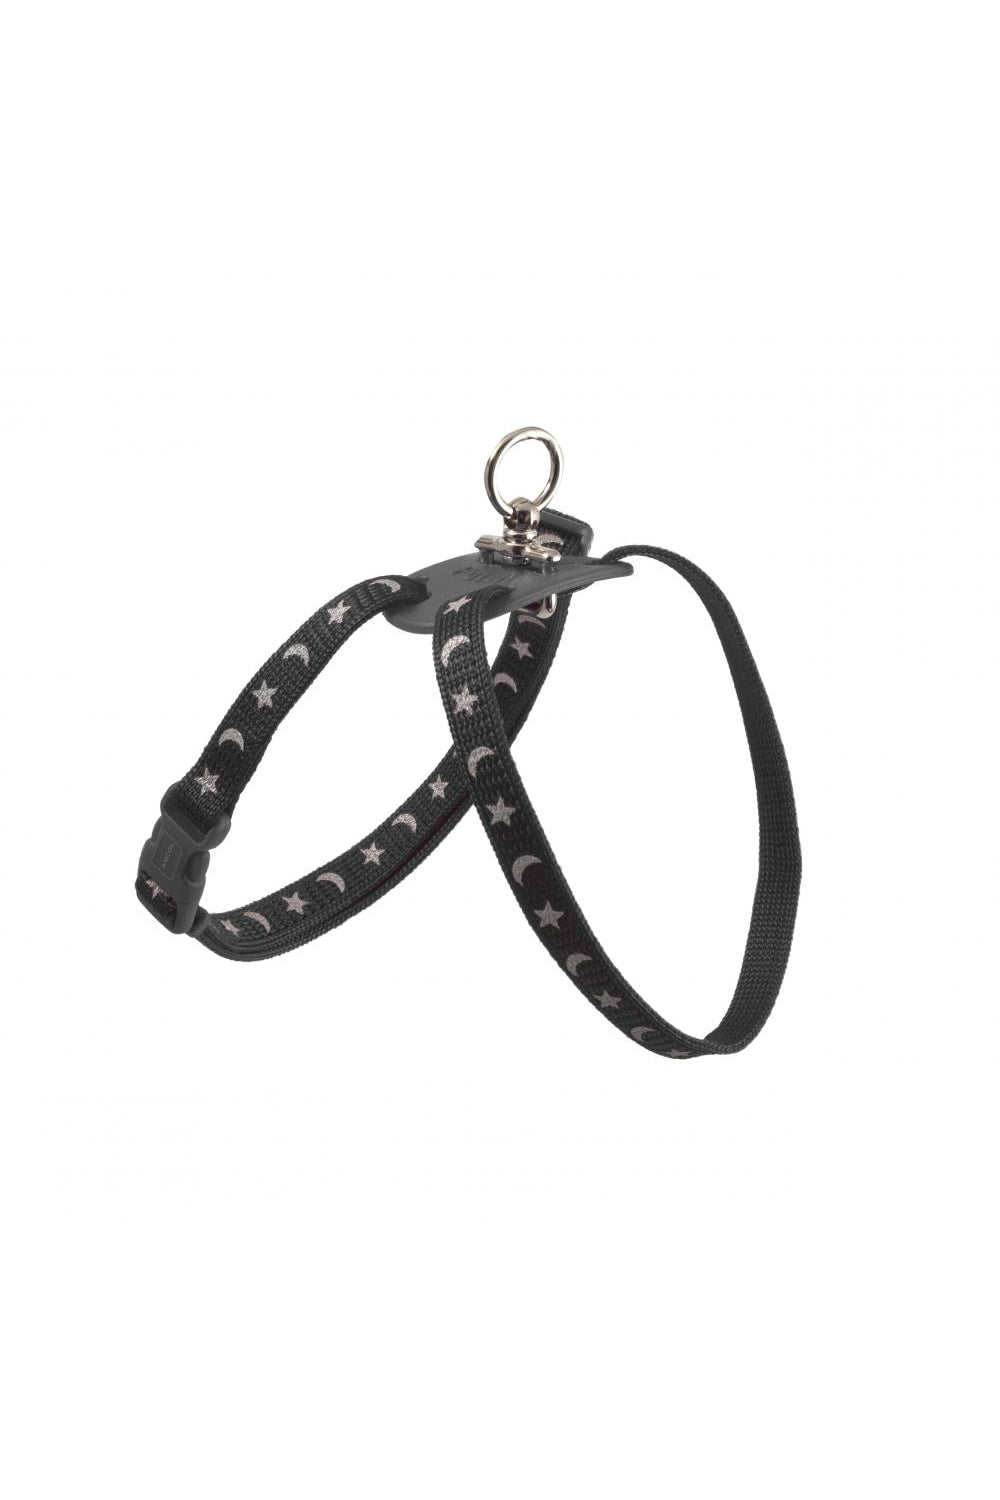 Ancol Reflective Cat Harness (Black) (One Size)